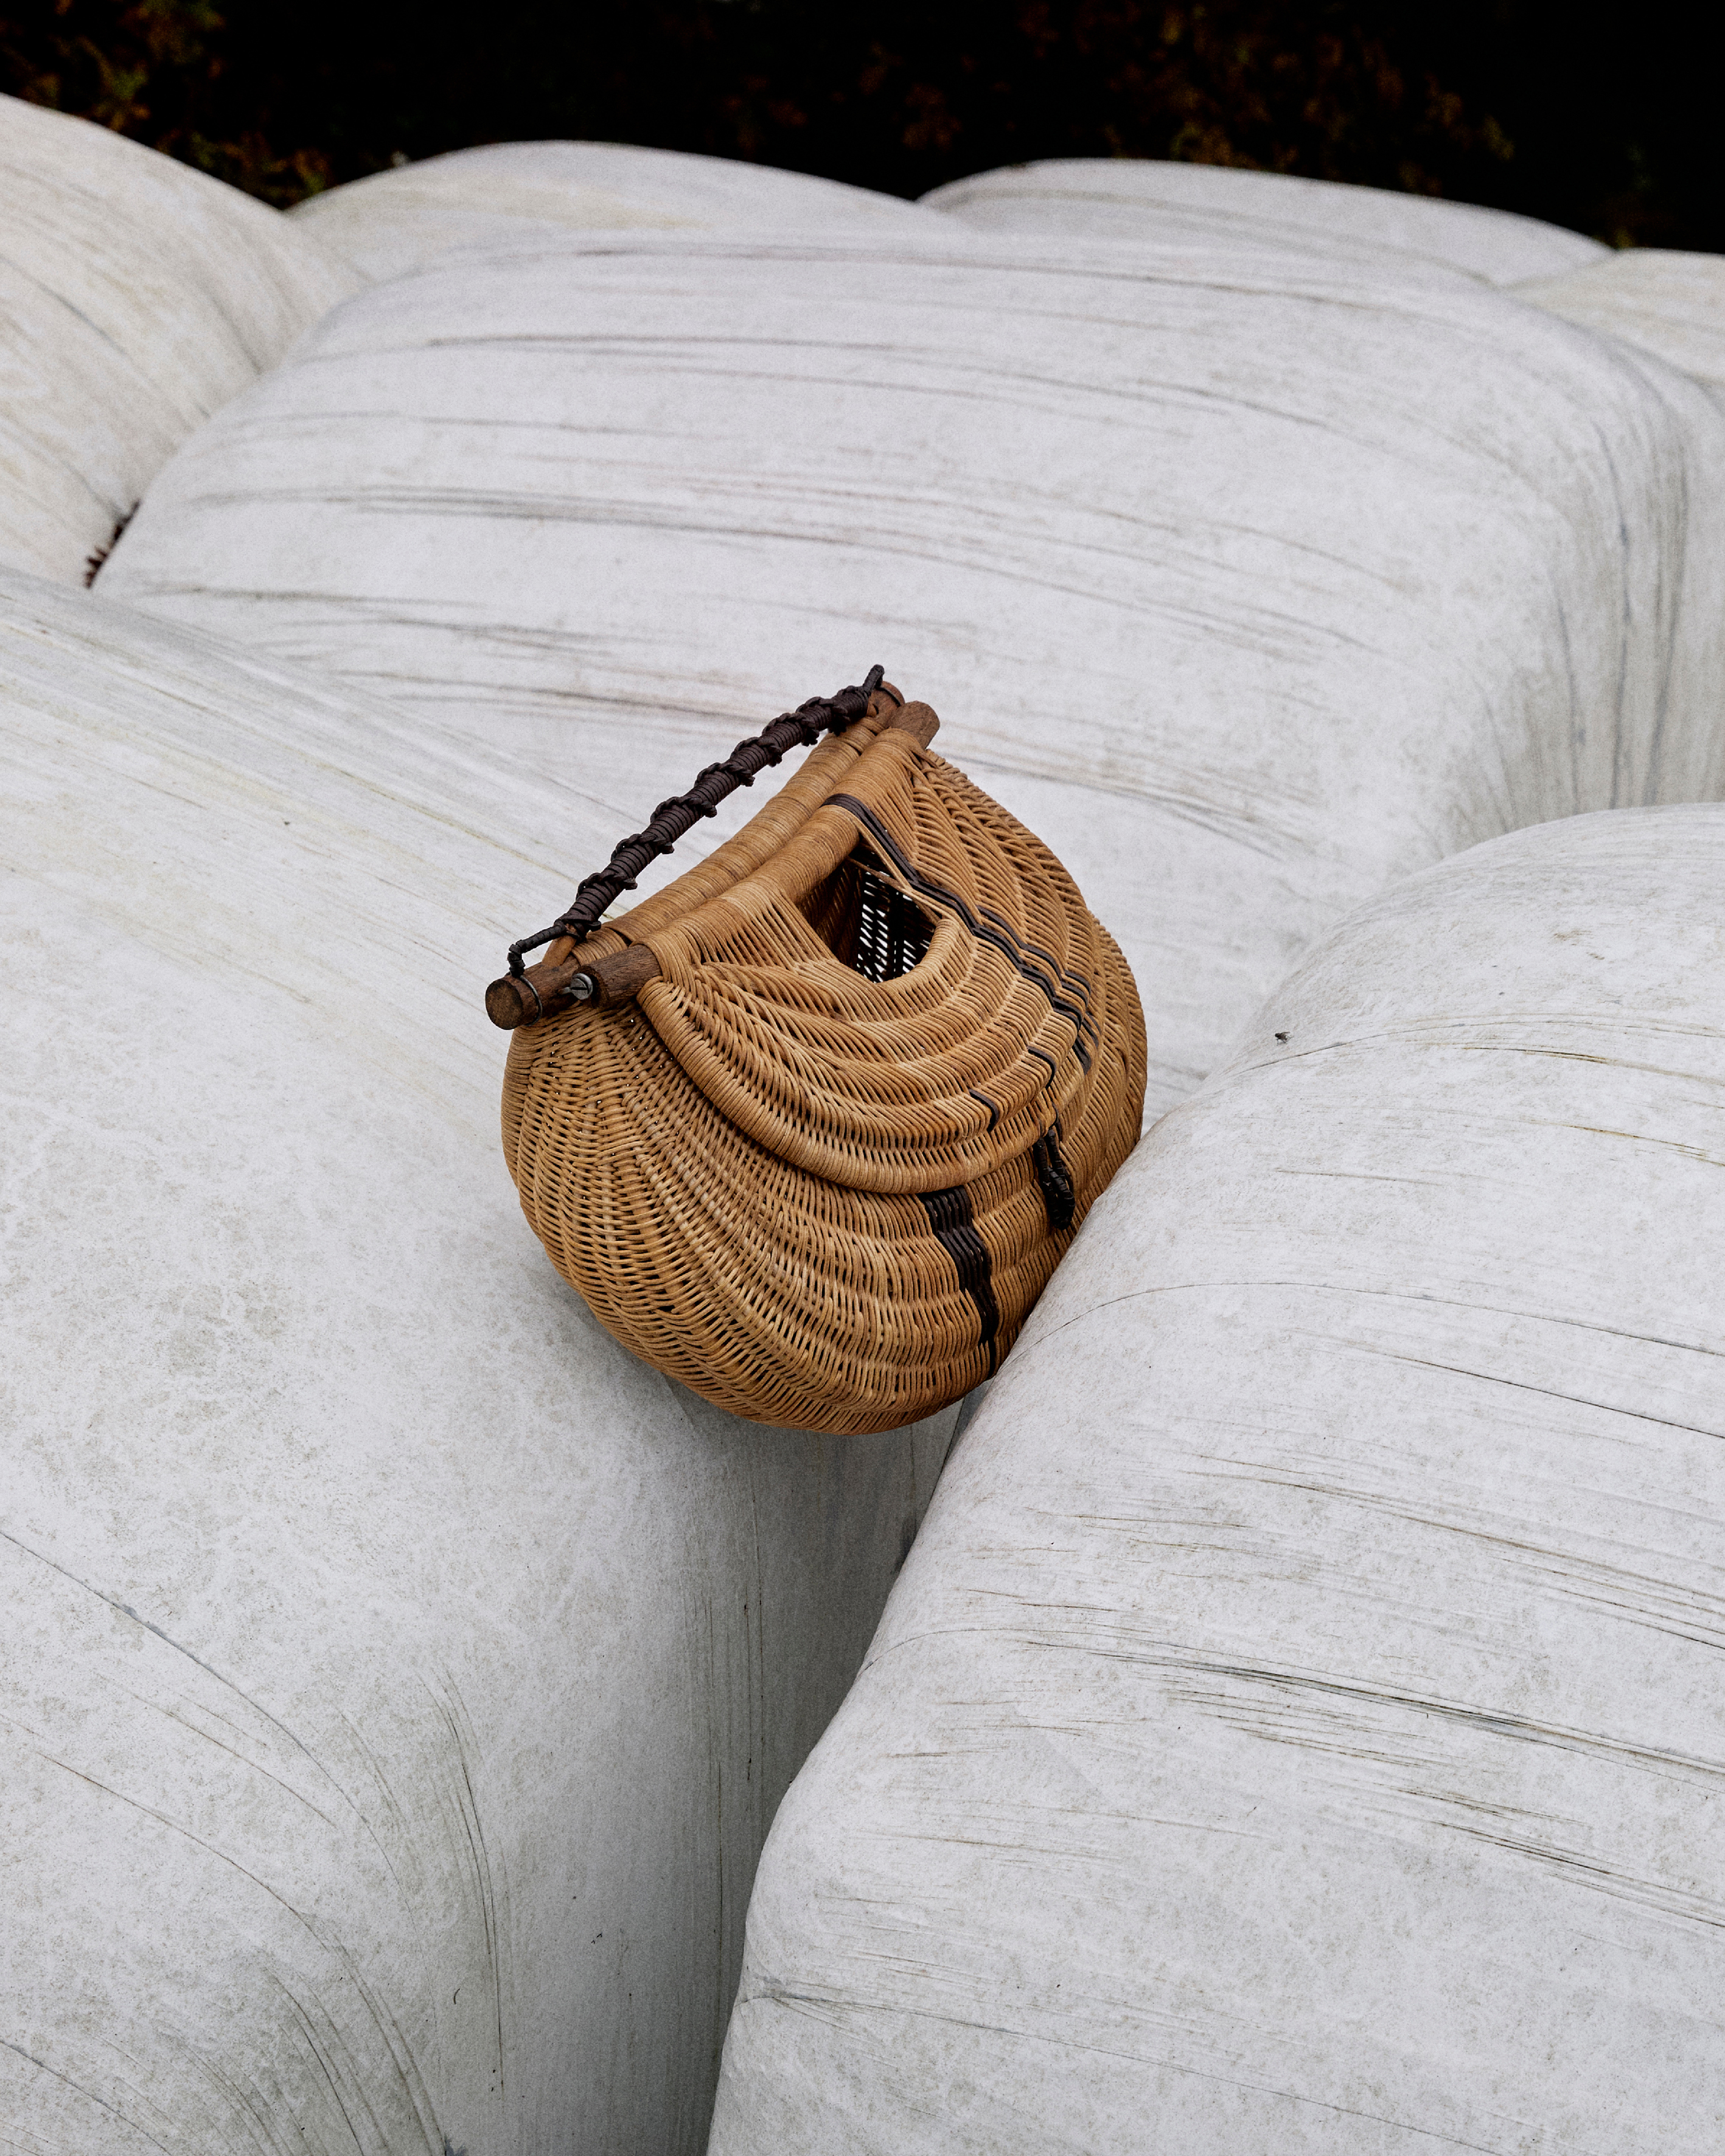 Loewe brings new life to objects with Weave, Restore, Renew